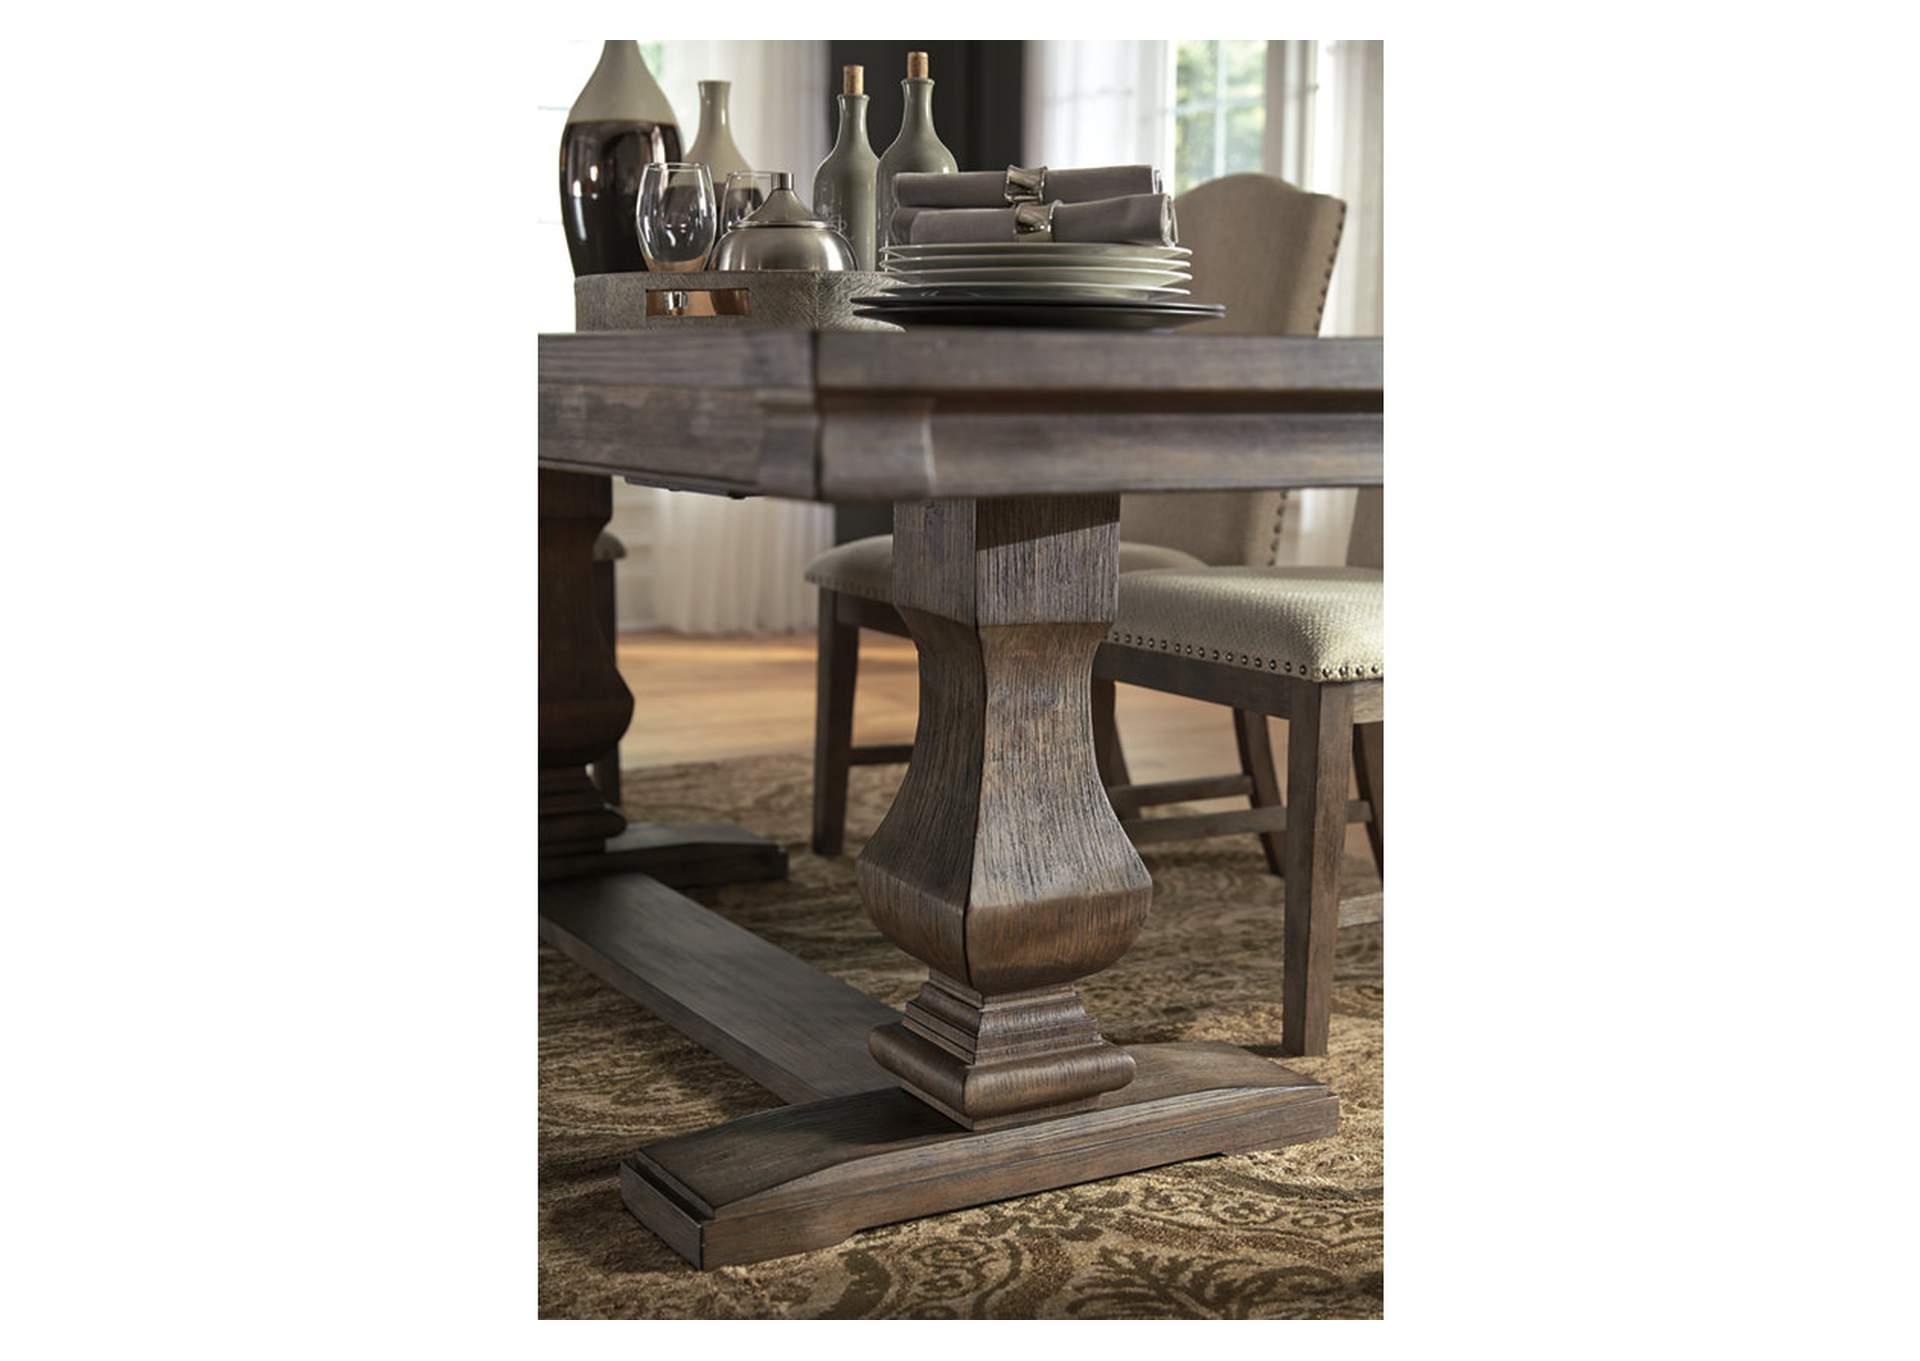 Johnelle Dining Table and 4 Chairs and Bench with Storage,Millennium